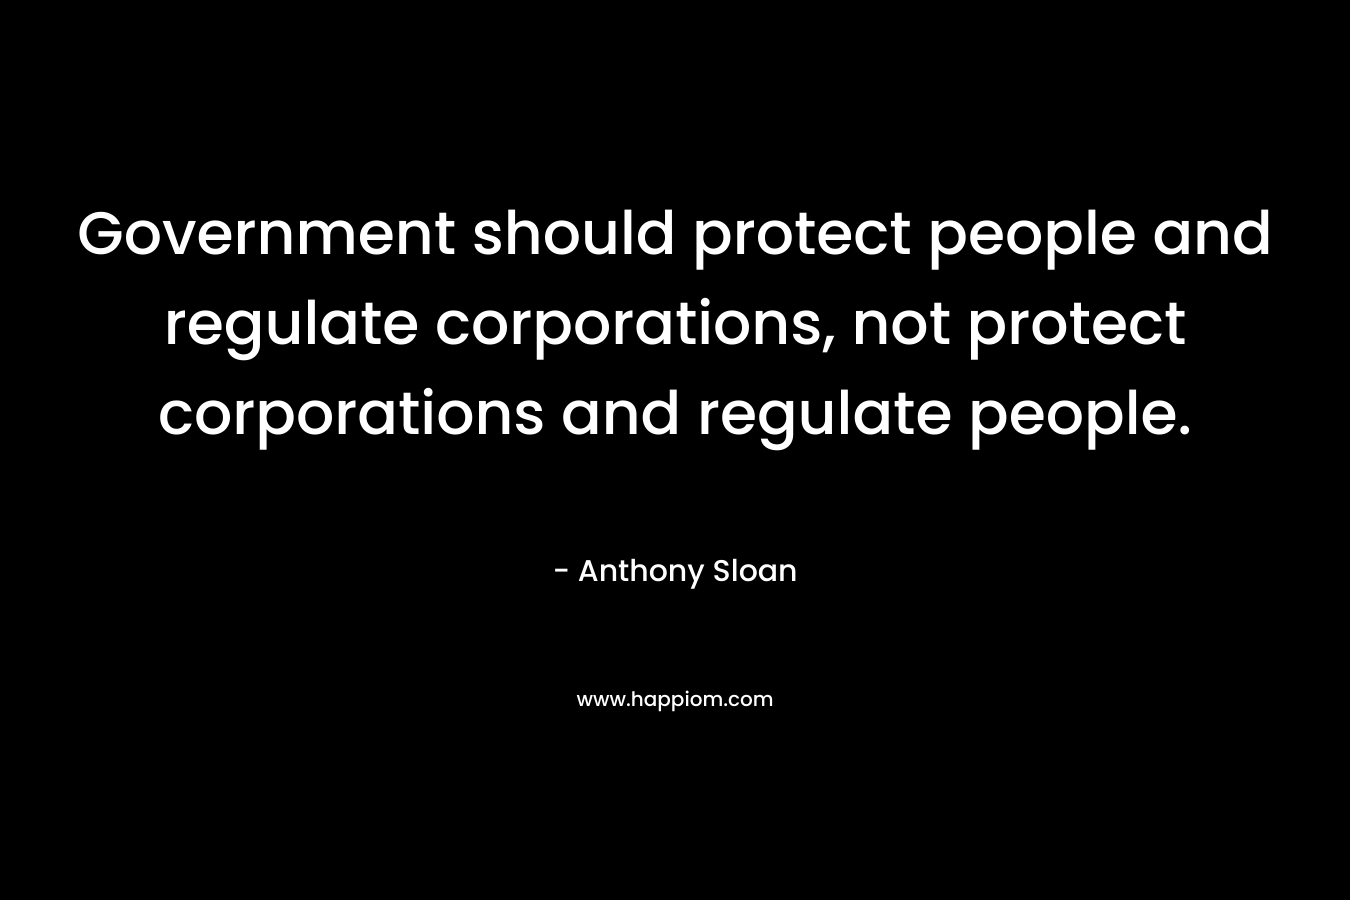 Government should protect people and regulate corporations, not protect corporations and regulate people.